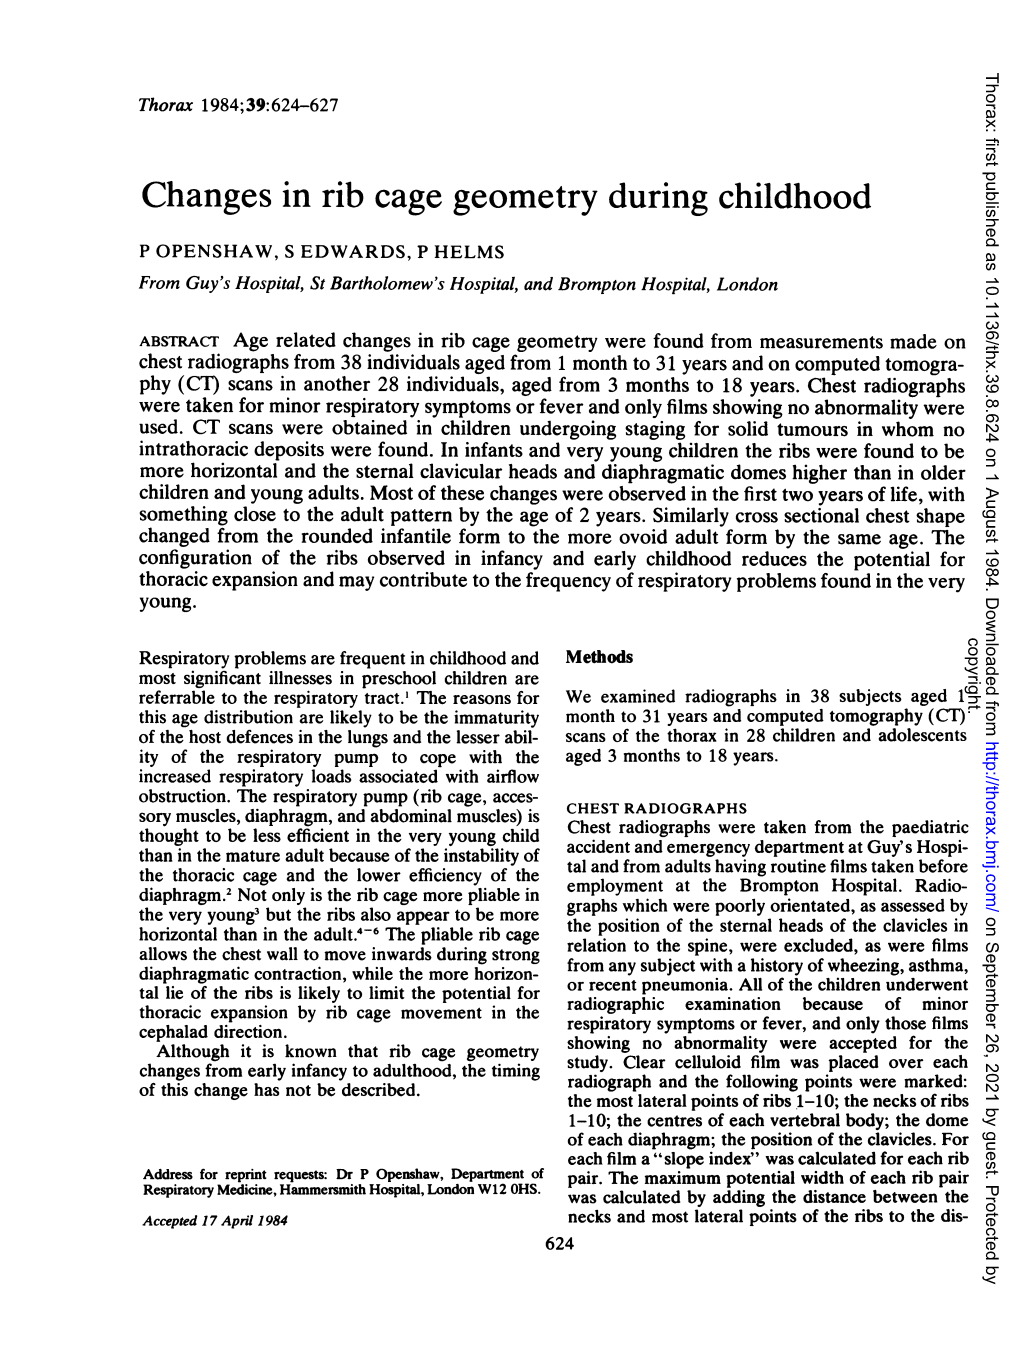 Changes in Rib Cage Geometry During Childhood